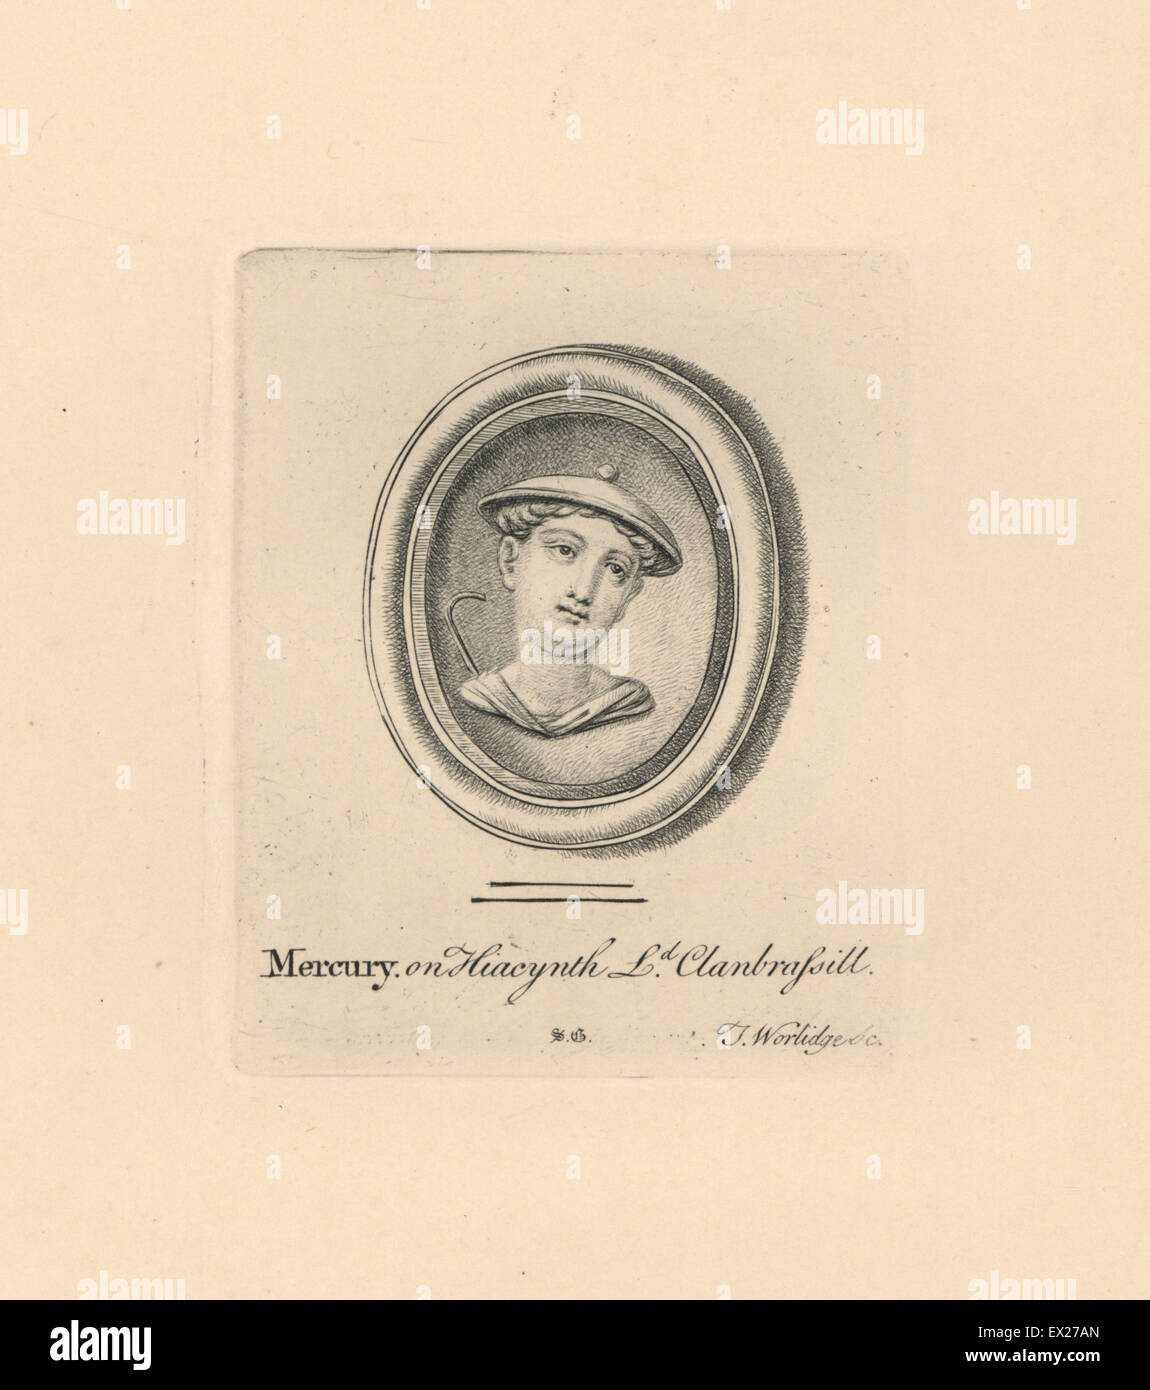 Portrait of Mercury, Roman god of commerce, poetry and communication, in sun hat or petasos, on jacinth in Lord Clanbrassill's collection. Copperplate engraving by Thomas Worlidge from James Vallentin's One Hundred and Eight Engravings from Antique Gems, 1863. Stock Photo